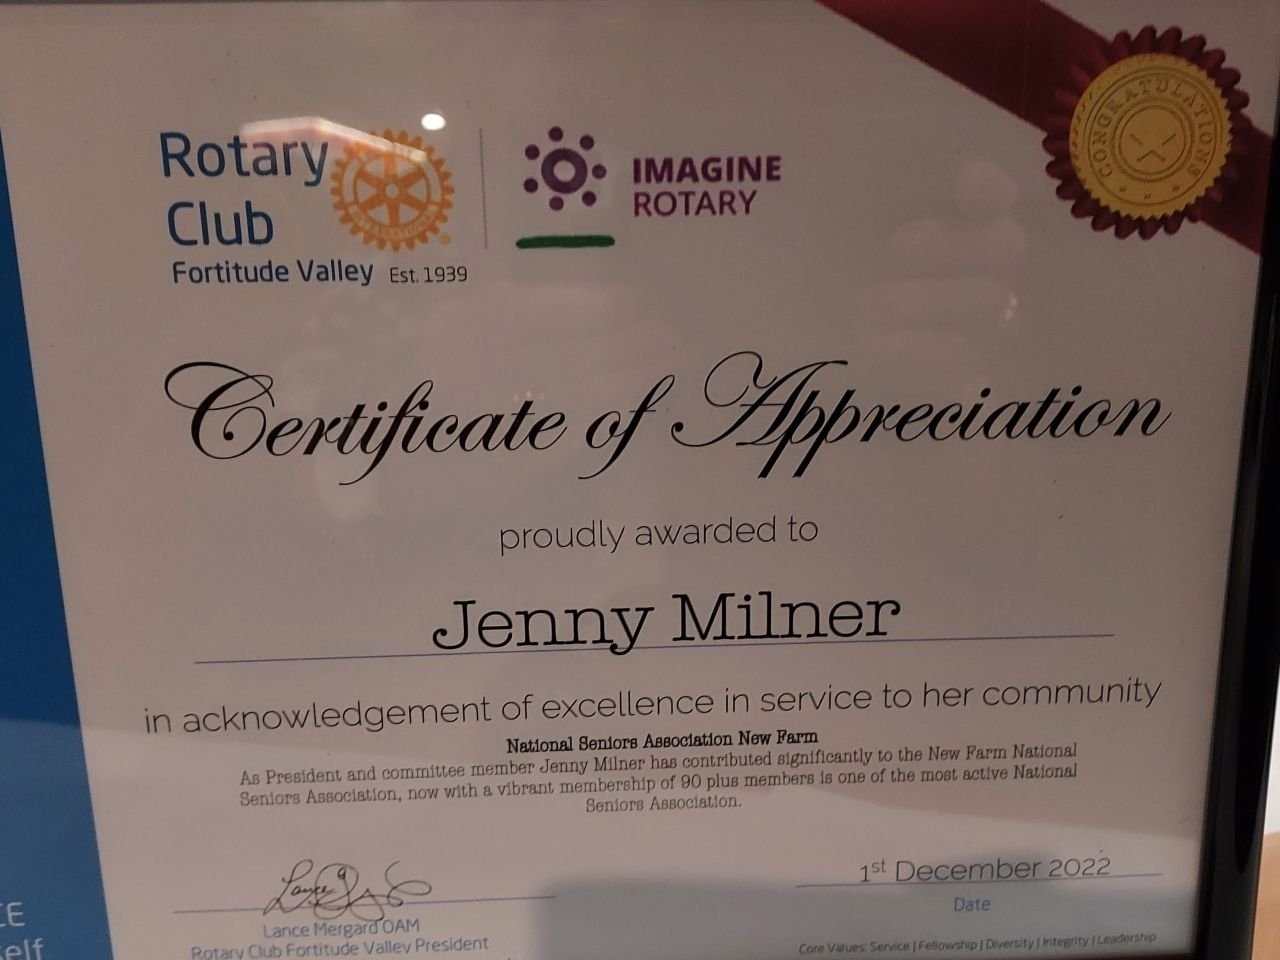 COMMUNITY AWARD: Rotary Club Certificate of Appreciation awarded to 
Jenny Millner for Excellence of Service to the Community. December 2022.